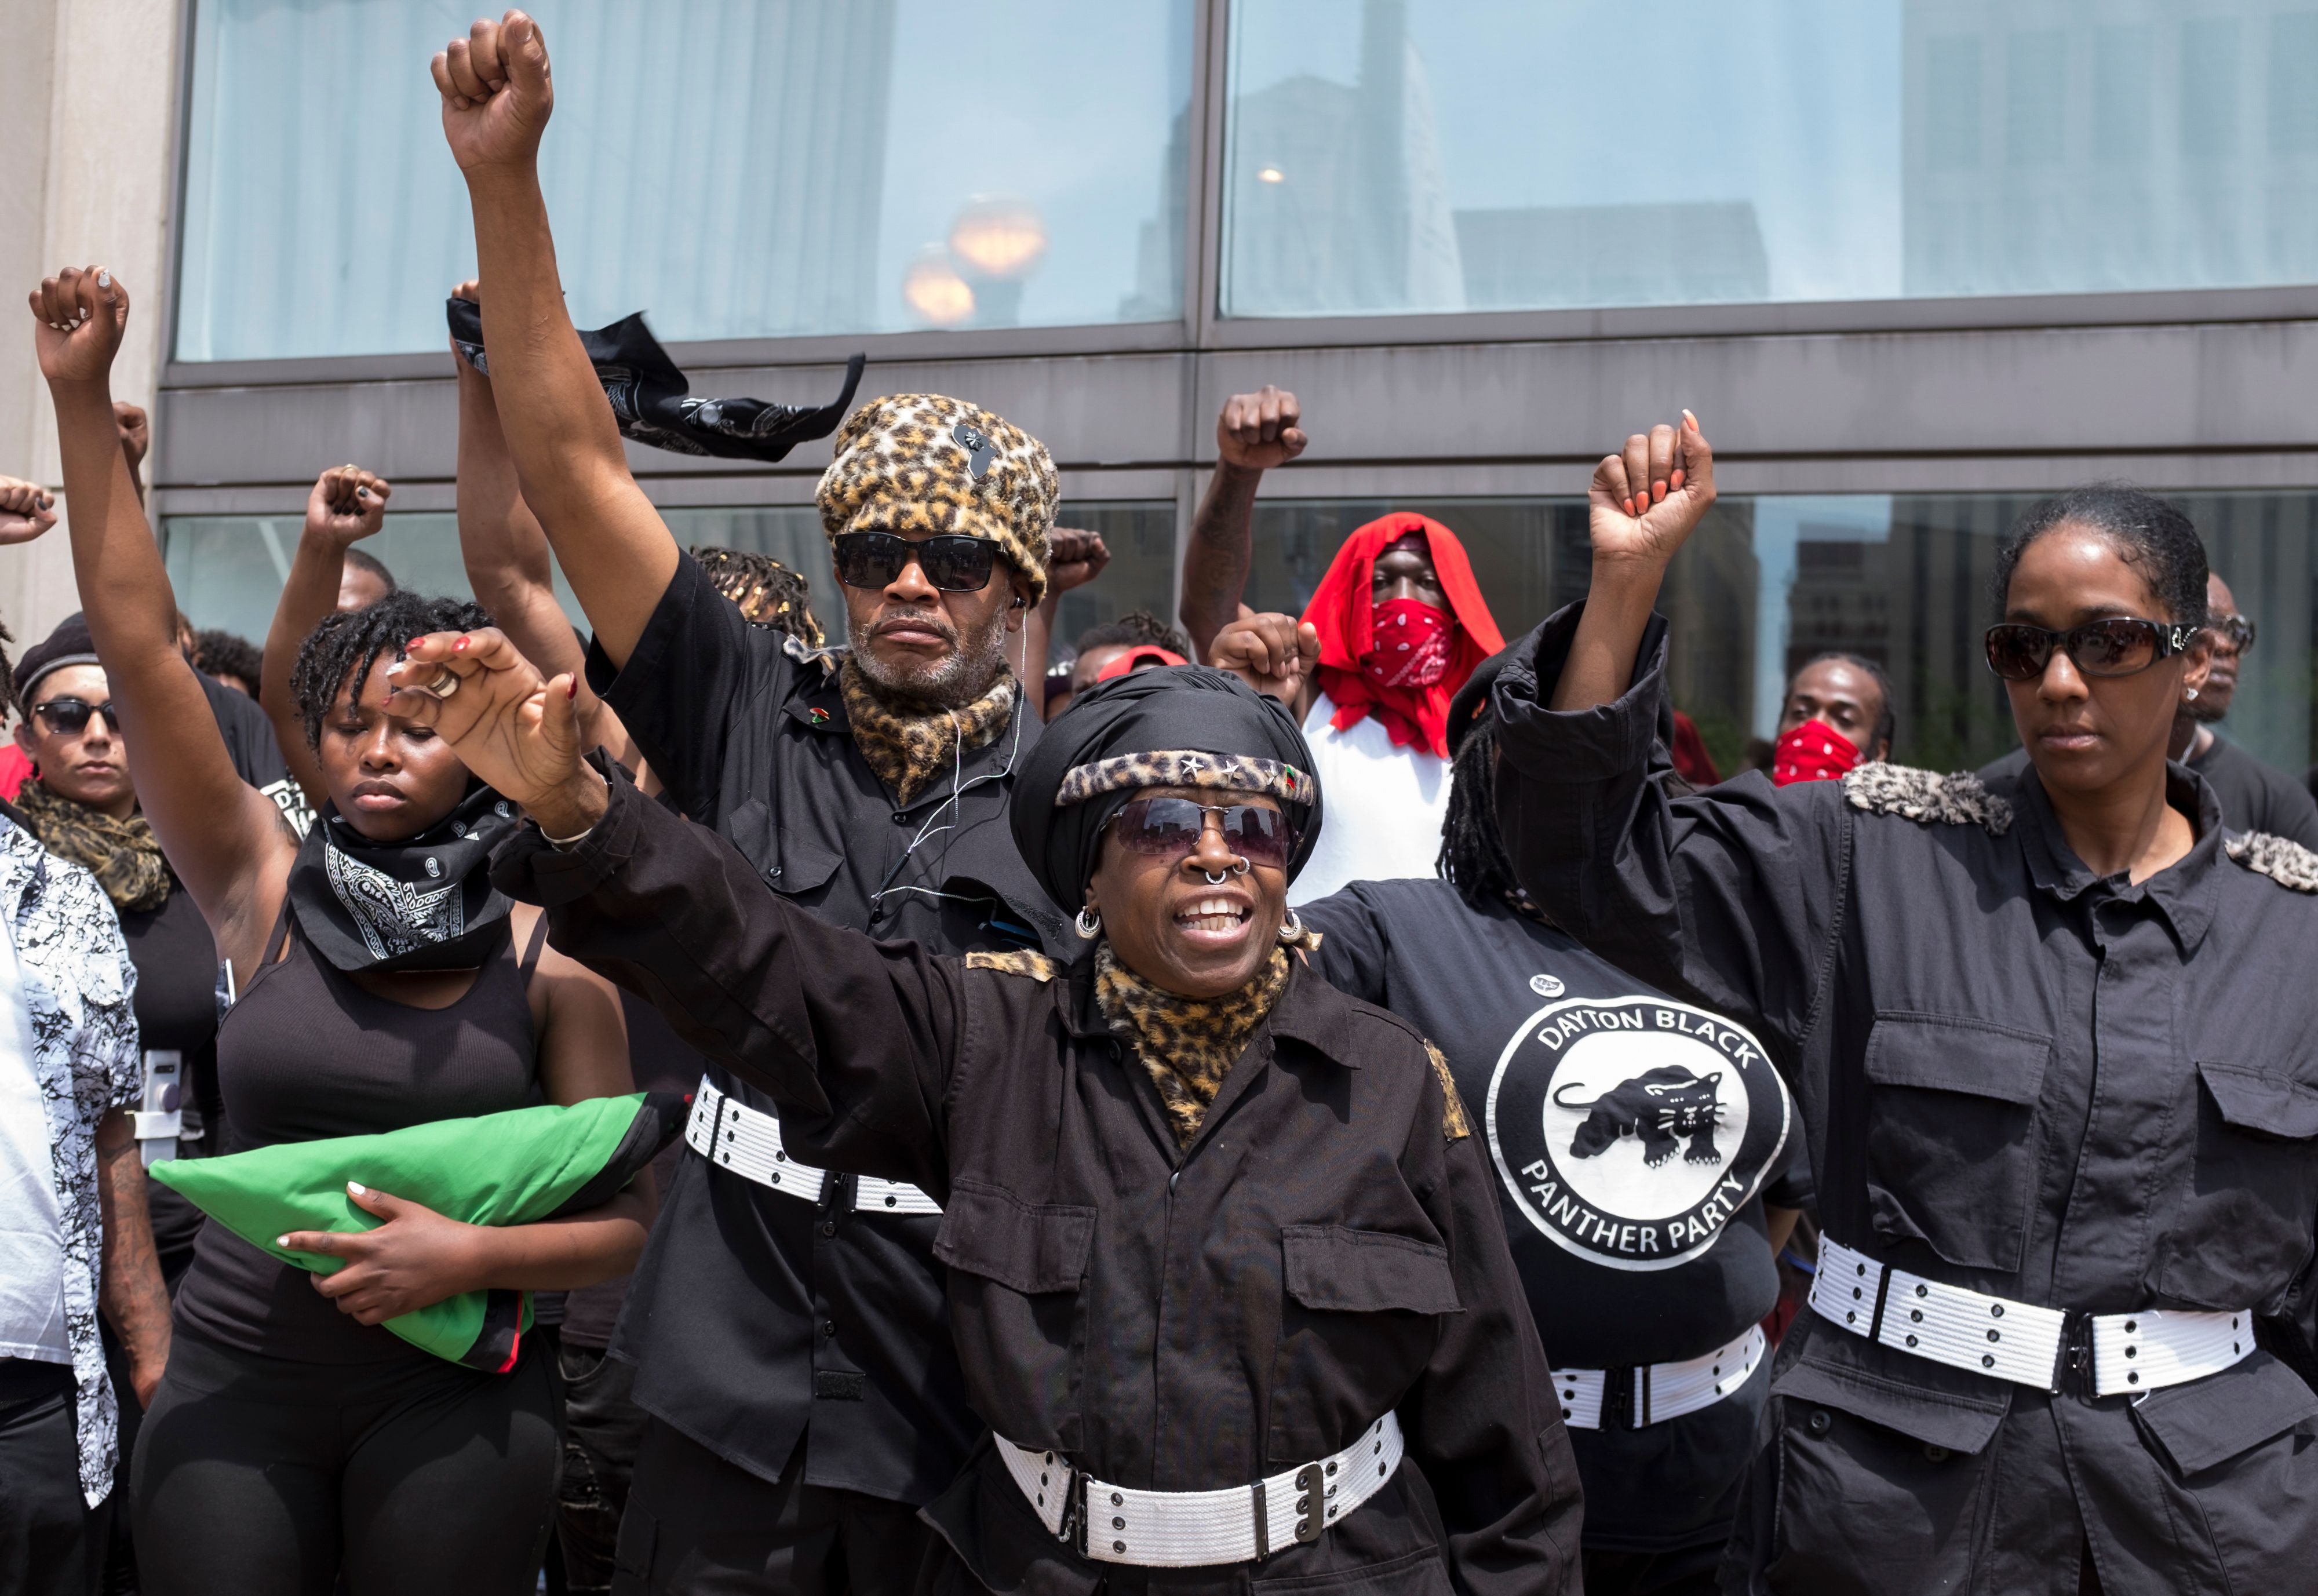 The Dayton chapter of the Black Panthers protest against a small group from a KKK-affiliated group during a rally in Dayton, Ohio, May 25, 2019. (SETH HERALD—AFP/Getty Images)